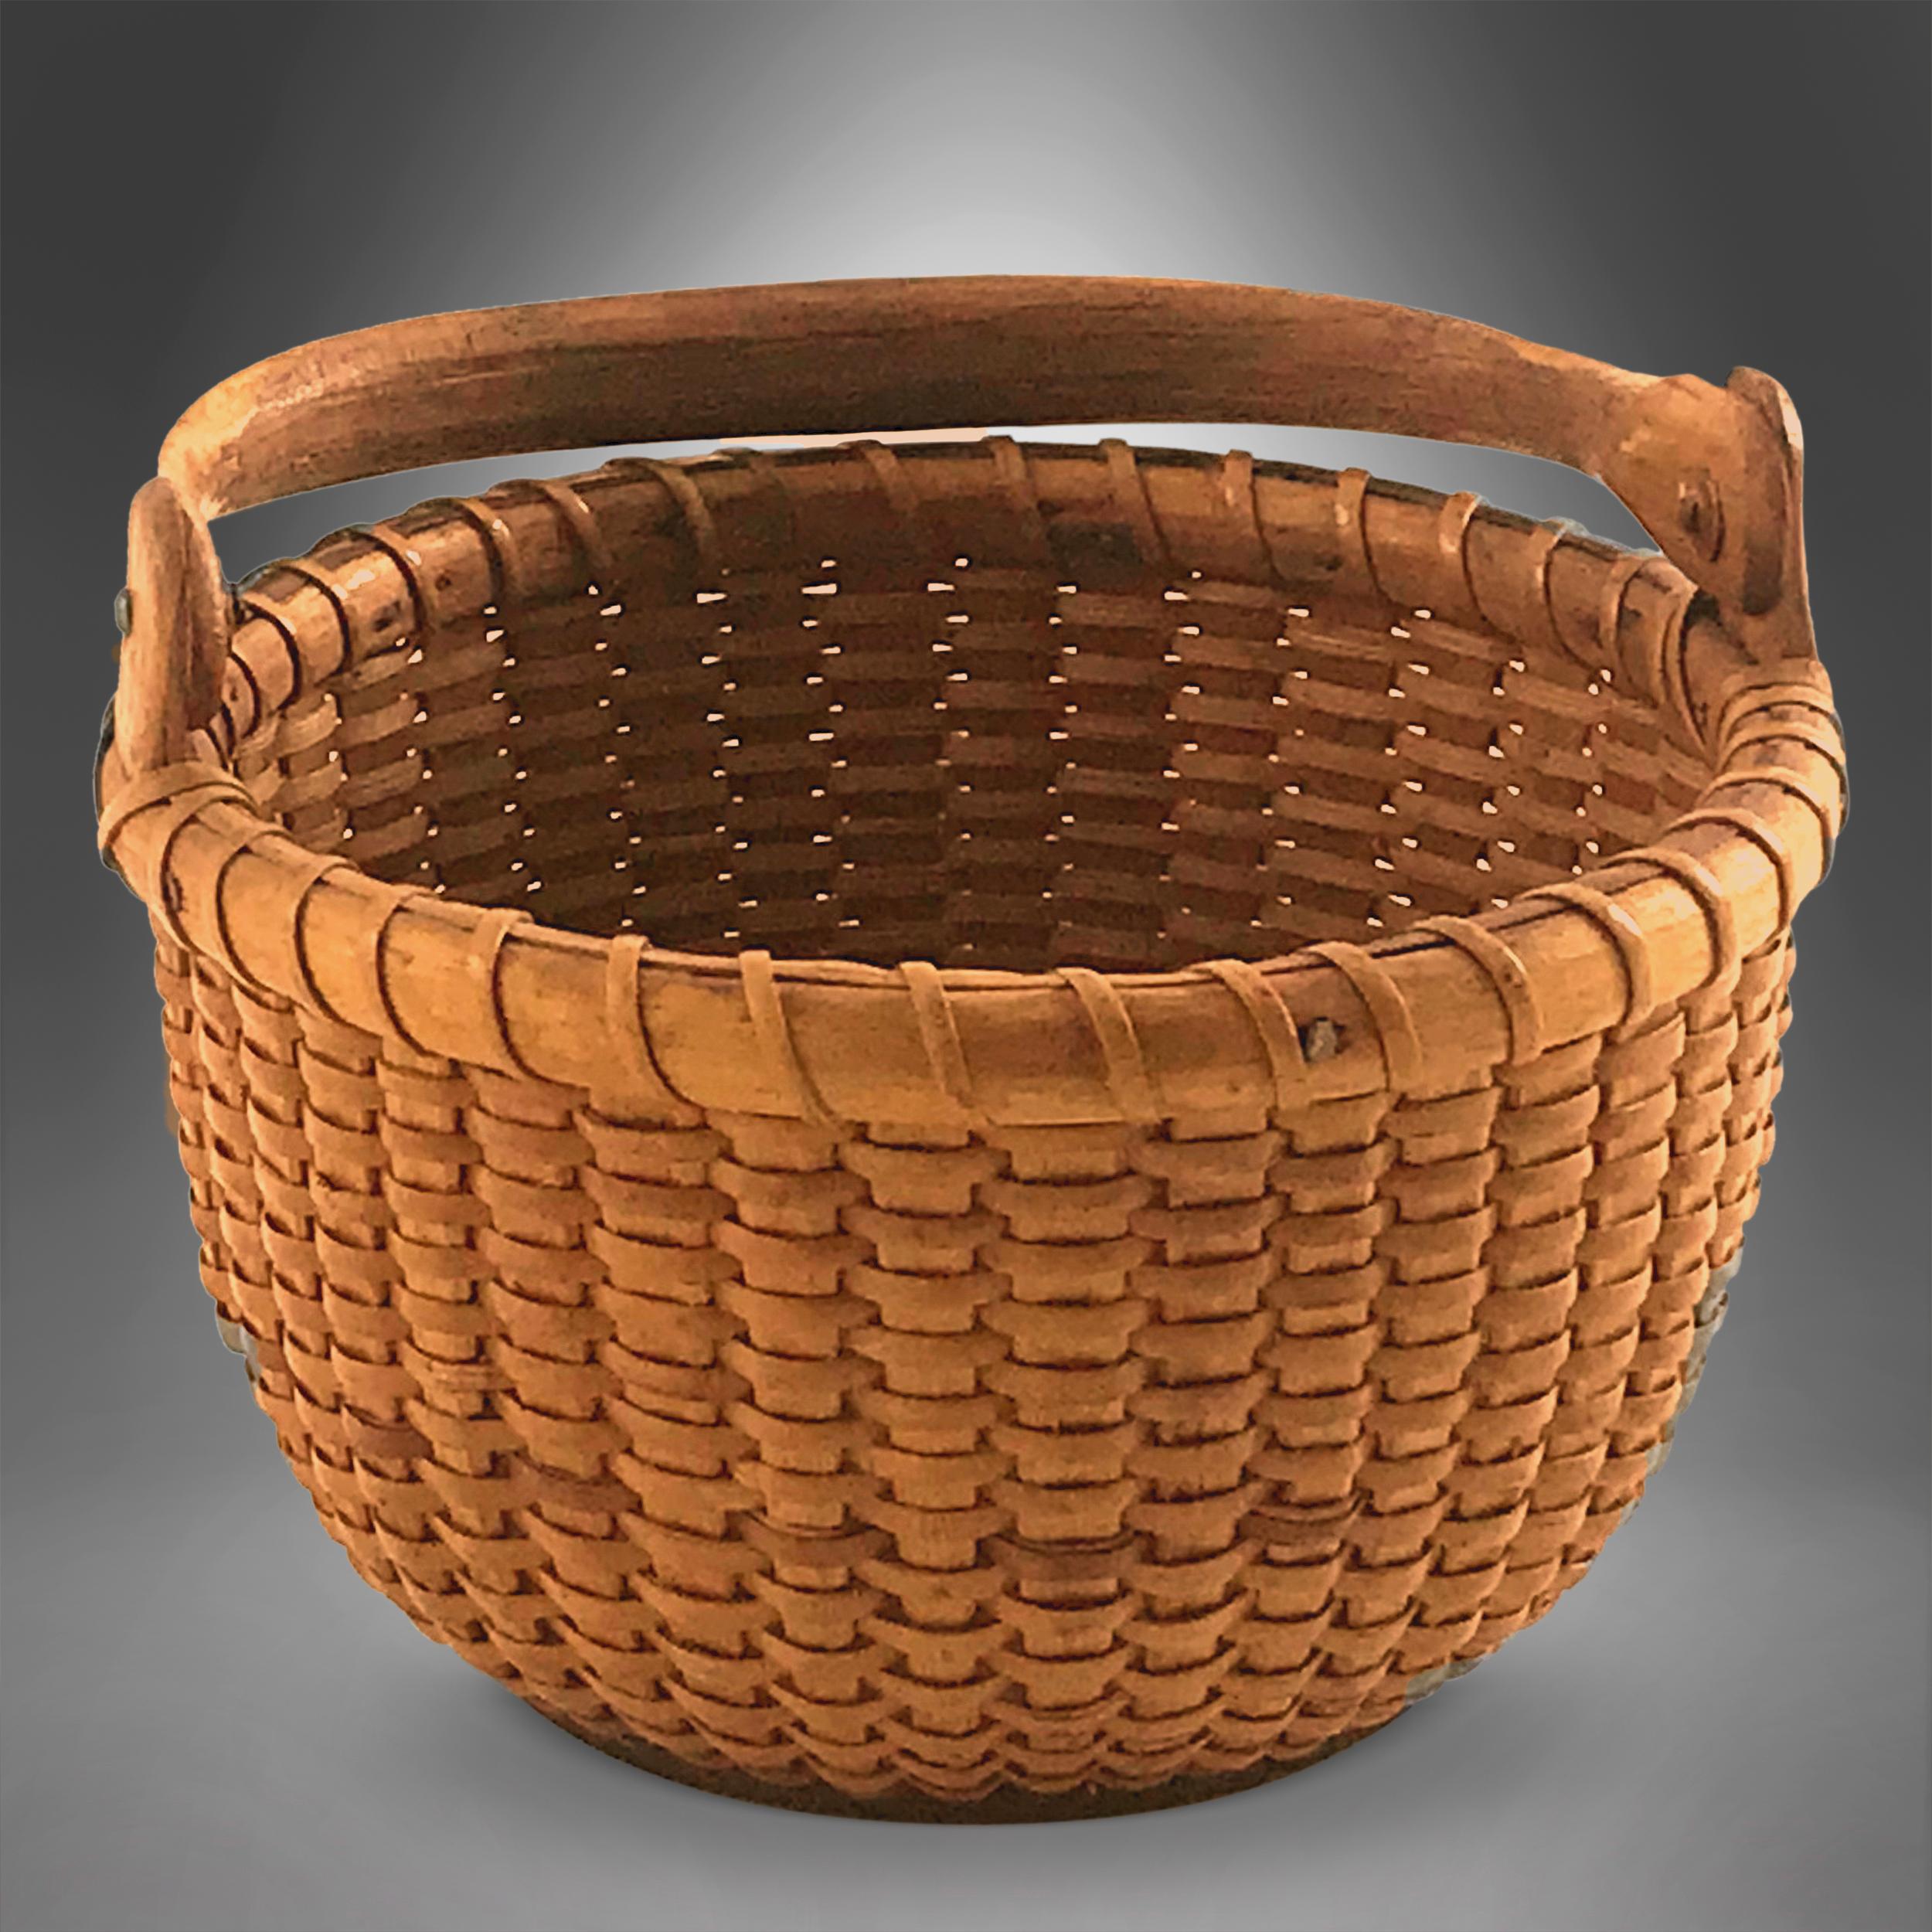 A small Nantucket lightship gathering basket
with sturdy wooden ears, and a convex interior
bottom with thee concentric lines typical of a
George Washington Ray (1814-1891) made basket,
circa 1870-1880. Measures: 4 ¾”.